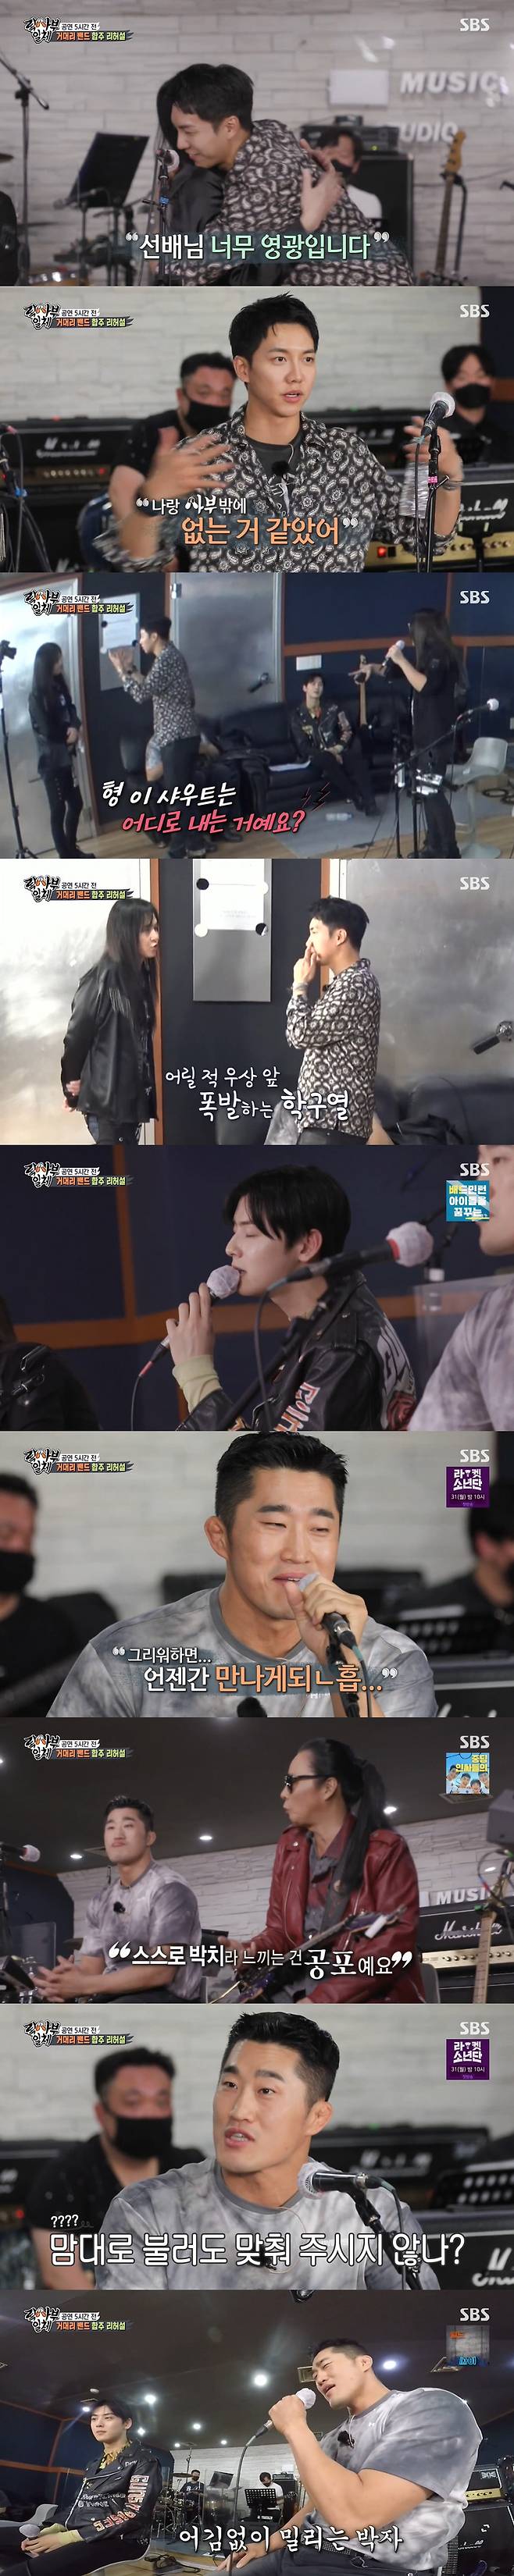 Members of All The Butlers formed and debuted the Rock Band leech.In SBS All The Butlers broadcast on the 23rd, Kim Tae-won, the leader of Koreas longest rock band Risen, and Kim Kyung-ho and Park Wan-kyu, who are holding the Korean rocker system with emotion and soul,Lee Seung-gi said, It is Idol in high school. I grew up listening to Kim Kyung-hos music. It is a generation that grew up listening to rock.Kim Kyung-ho said, The rock spirit we have is resistance, freedom, peace, but nowadays we are happily singing with many compromises with society.Theres a lot of resistance gone, he said, laughing.The masters, who are sorry for the festival culture that has stagnated with Corona 19, prepared an untapped stage to enjoy with rock band juniors.At this time, the masters released secrets such as performances and facial expressions that bent the audience for the rock festival.Kim Kyung-ho said: Rocker is confident - the stage protagonist is me.The reason why I do not use sunglasses on stage is to act when I sing. At this time, Park Wan-kyu took off his sunglasses and laughed at him saying, I am doing it. Park Wan-kyu said, When I was in high school, my band name was Ohamma; some friends were cyanide, while Kim Tae-won said, How about Minari?How about an animal leech in Minari? Five hours before the performance, the members headed to the practice room for a band concert rehearsal.Lee Seung-gi is a song that I want to sing with my master. I feel so good to sing together. Kim Kyung-hos I loved you and Park Wan-kyus Millennial Love decided to practice and decide.Lee Seung-gi was immersed with all her heart, and Kim Kyung-ho praised her for really singing well.In particular, Lee Seung-gi exploded his school district in front of Idol as a child.Kim Dong-Hyun and Cha Jung Eun-woo chose Risens Never Ending Kahaani, while Yang Se-hyeong practiced Bon Jovis lts my life.In this process, Kim Dong-Hyun laughed when he said, I just need to care about the beat.In addition, Yang Se-hyeong showed off the spirit of the inherent rock star.Meanwhile, the leech band made its debut that evening.Lee Seung-gi said, Many people are very hard, as the performance industry is almost devastated by Corona 19.I have not been performing for six months, and I am filling my negative income with part-time jobs, said One Button Band. It seems to be the saddest thing that my mind is shaking.Kim Tae-won said, People who are playing music should be loved to get energy. Please Risen.Kim Kyung-ho and Park Wan-kyu exploded the rock spirit that was sealed as Shout, and Kim Tae-won showed off his guitar skills with 4.1.9 Elephant Escape.Park Wan-kyu, Jung Eun-woo, Kim Dong-Hyuns Never Ending Kahaani, Yang Se-hyeong, who turned into a brewing cost, and Park Wan-kyus lts my life stage.The Duets stage of Kim Kyung-ho and Lee Seung-gi was also unveiled; Lee Seung-gi said, This stage is special.In high school, Kim Kyung-ho sang and sang while singing and became a singer. There is comfort and warmth that you give.I think that many people will be hard to remember those days when I was comforted, but I hope it will be a time to be happy and healing for a while. Kim Kyung-ho and Lee Seung-gi loved, Kim Kyung-ho and Park Wan-kyu and Lee Seung-gi showed off their rock spirits by singing Millennium Love and Forbidden Love.